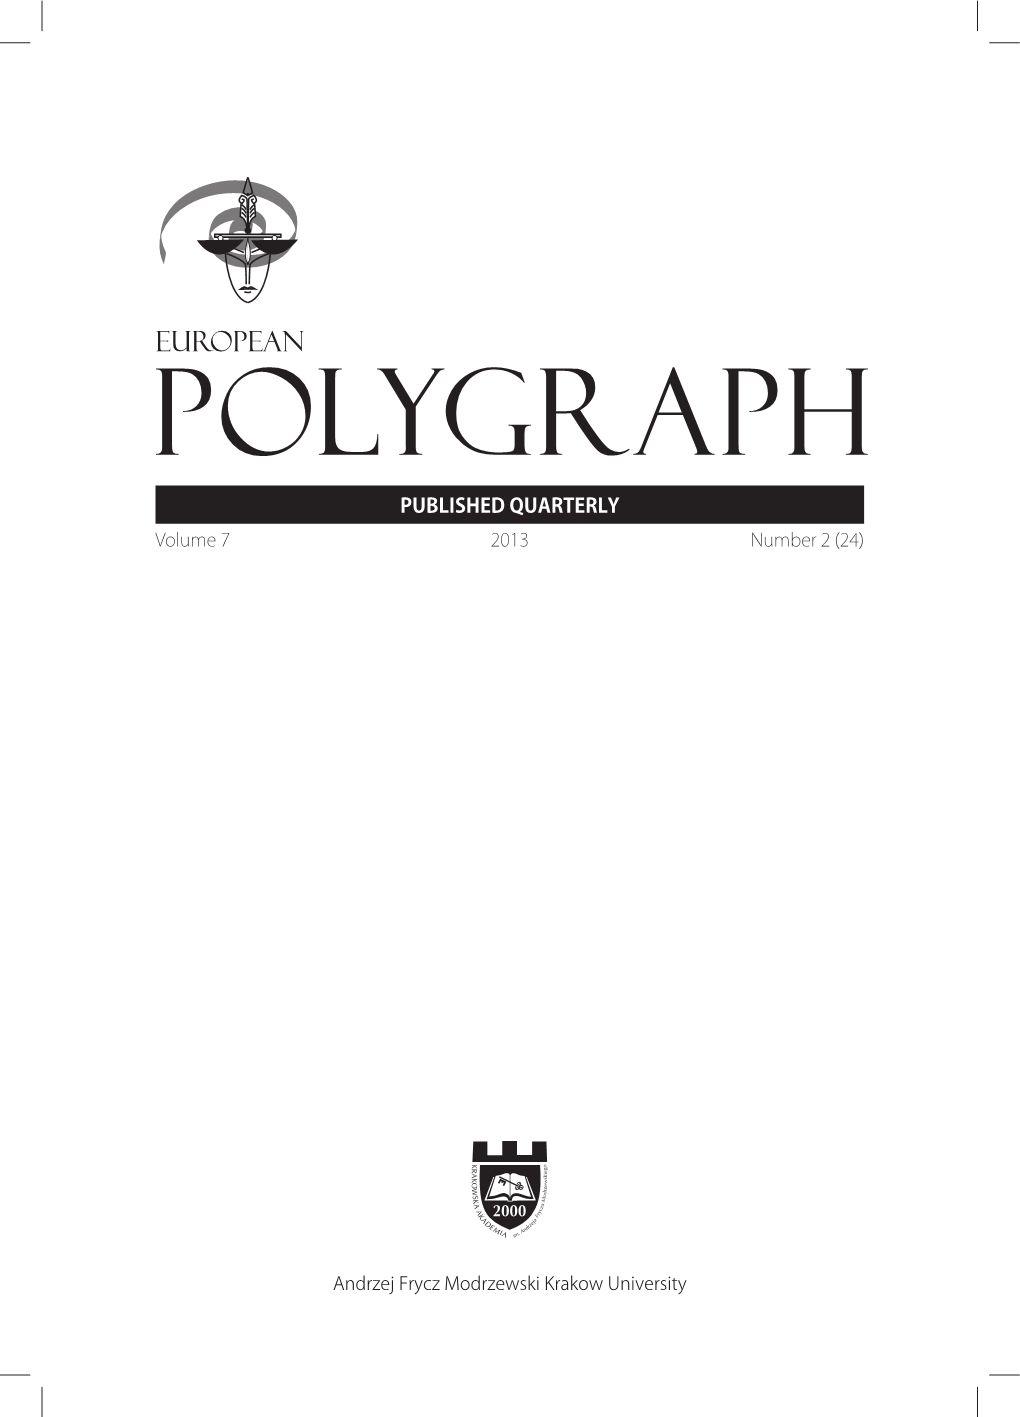 Limited response to Marcin Gołaszewski’s Conclusions From the Meta-Analytic Survey of Criterion Accuracy of Validated Polygraph Techniques